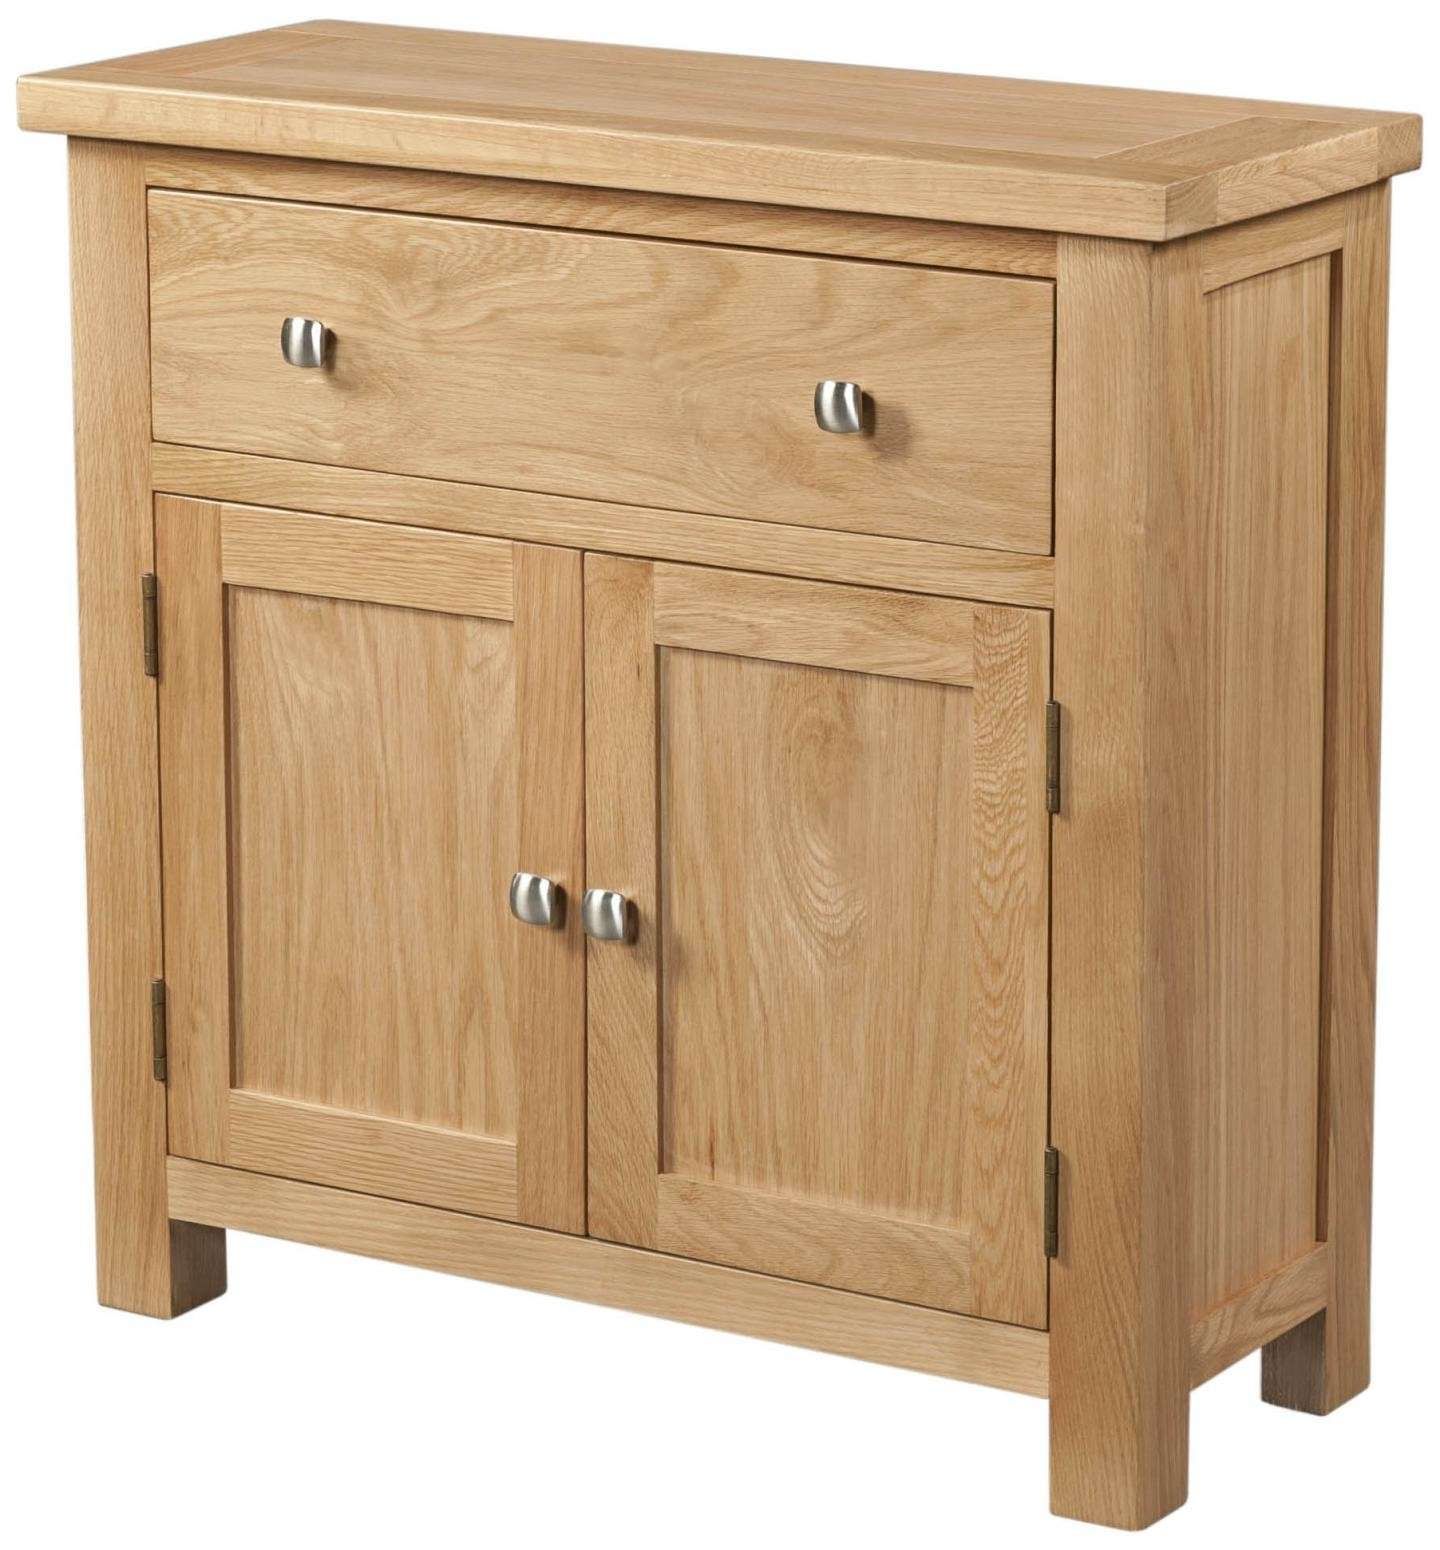 Lovely Pine & Oak Sideboards | Willoby's Furniture Swindon, Wiltshire In Pine Sideboards (View 16 of 20)